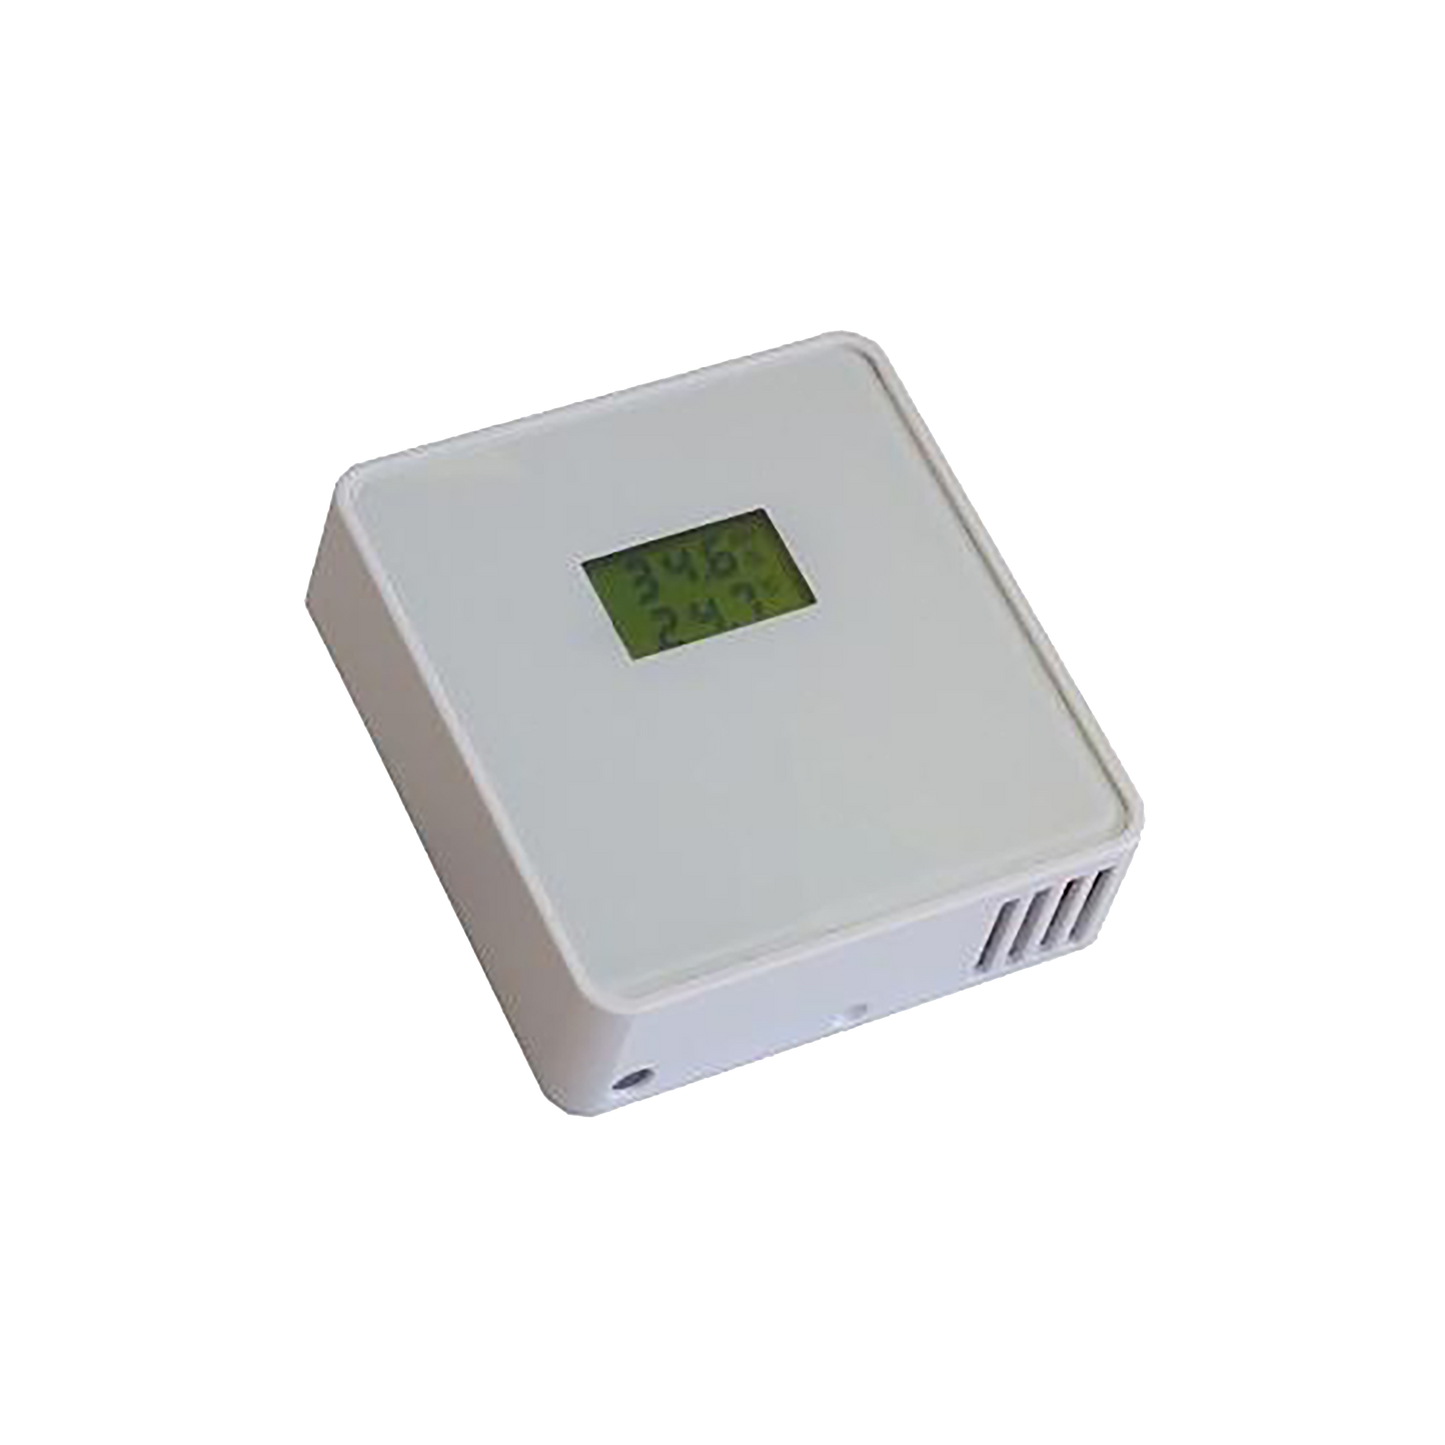 MSL Temperature & Humidity Sensor with LCD